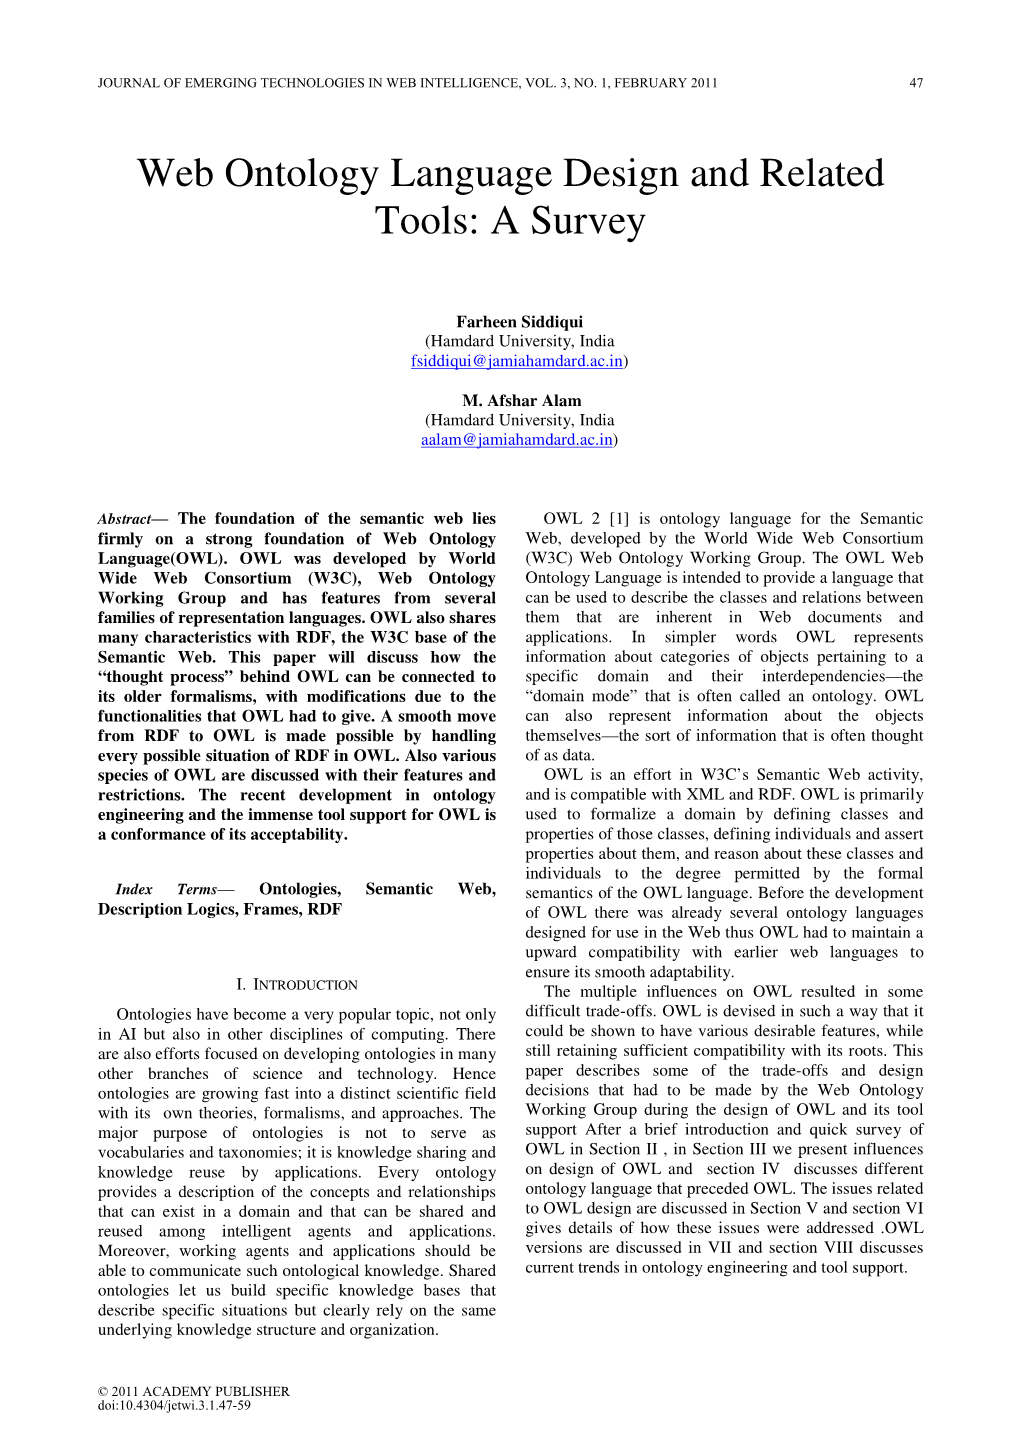 Web Ontology Language Design and Related Tools: a Survey